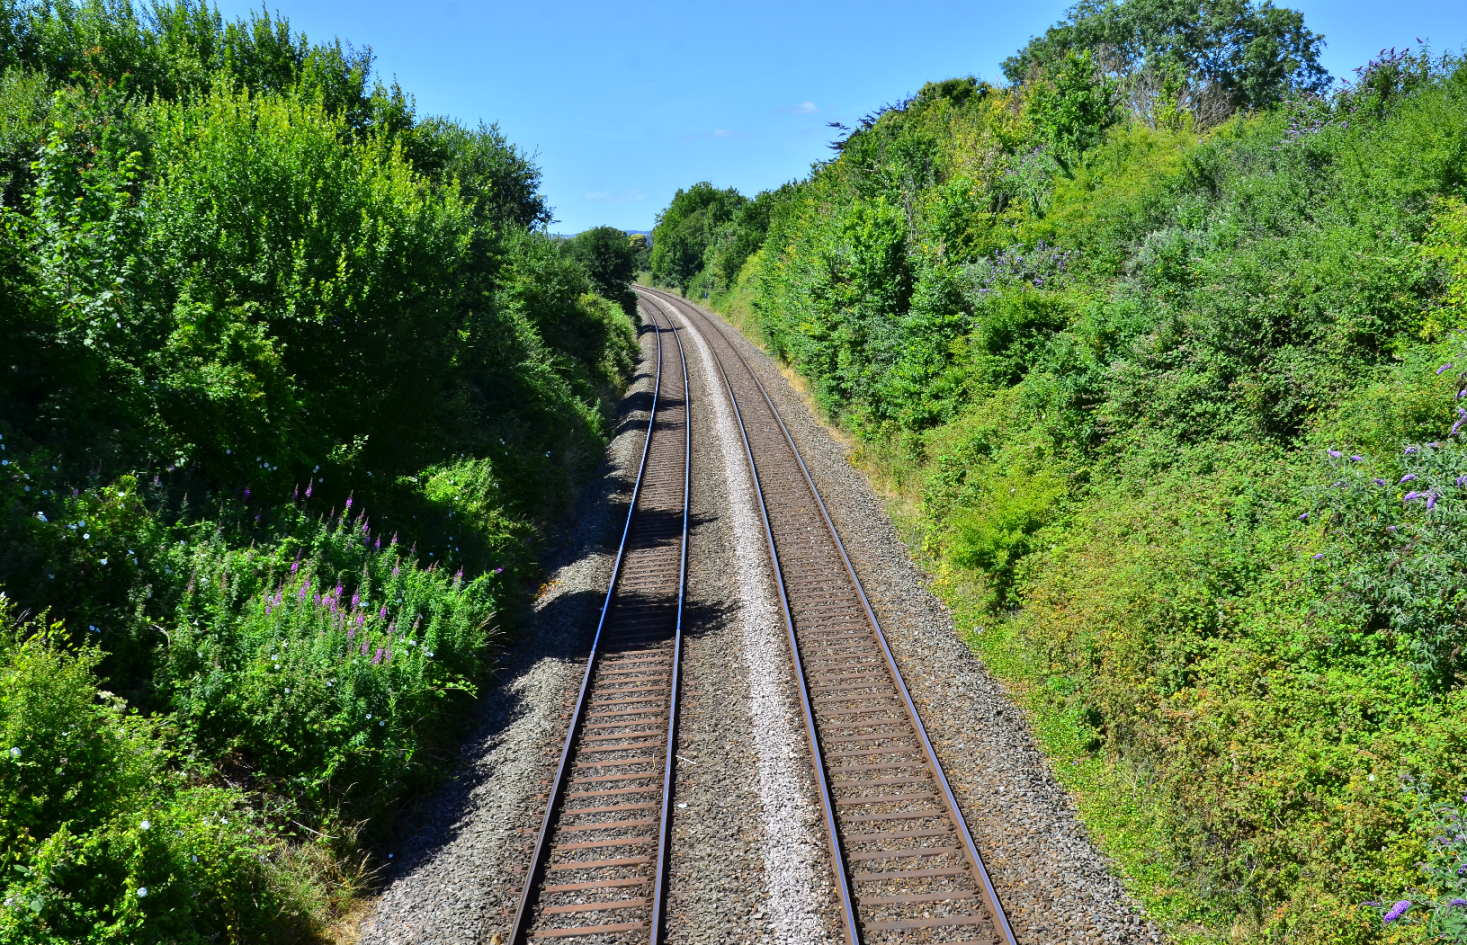 Double tracks curving to the left